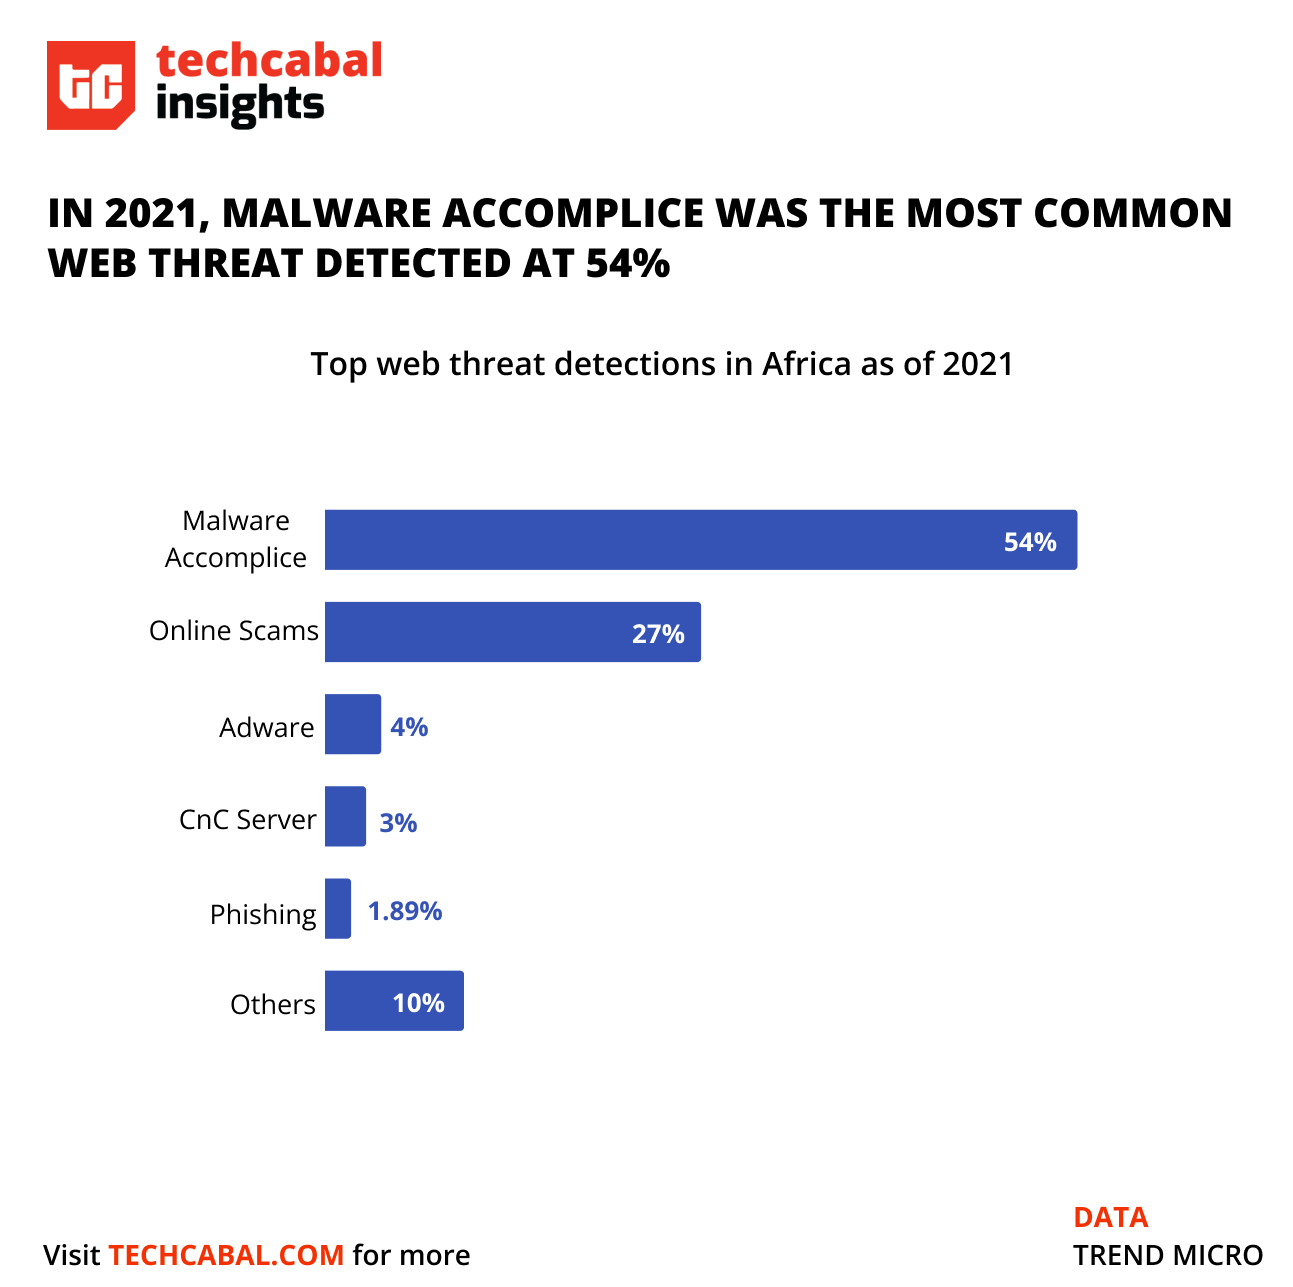 Data on web threat detections